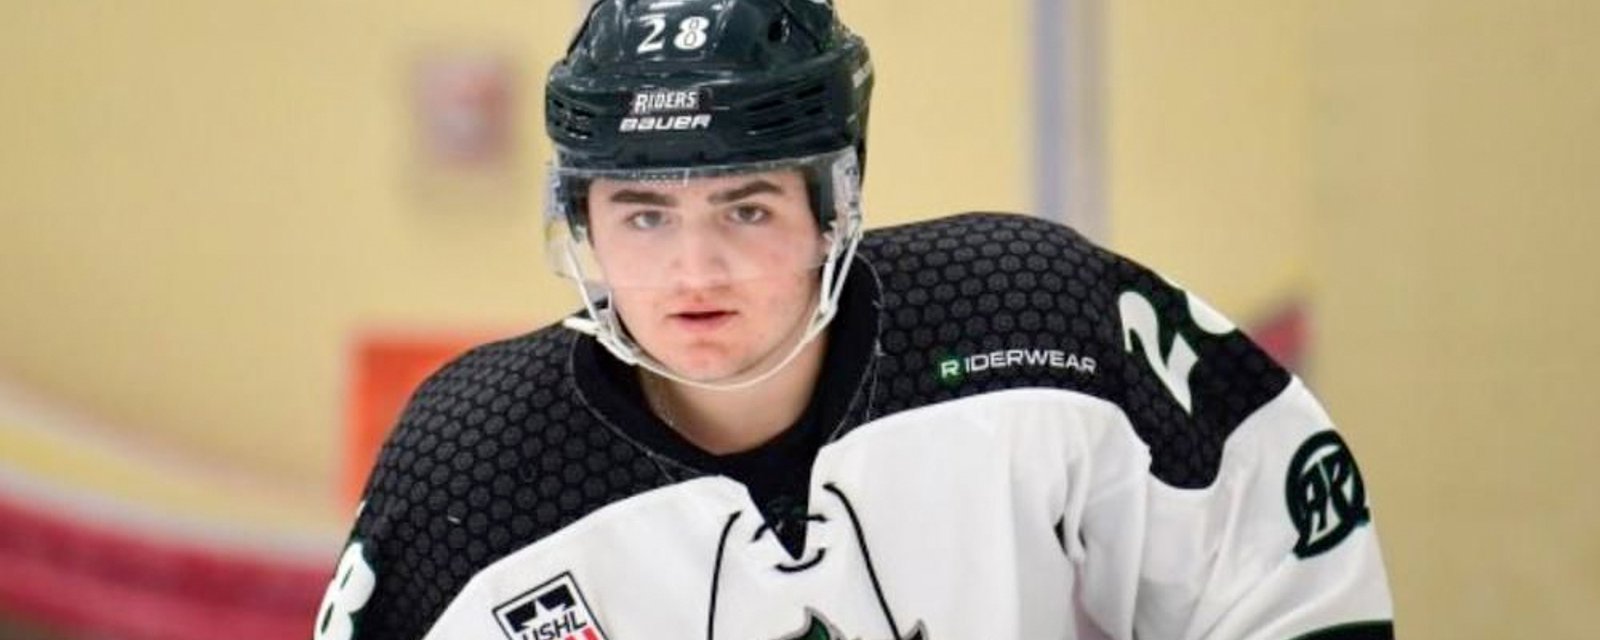 Disgraced NHL prospect Mitchell Miller makes it clear he has no remorse for disabled boy he abused